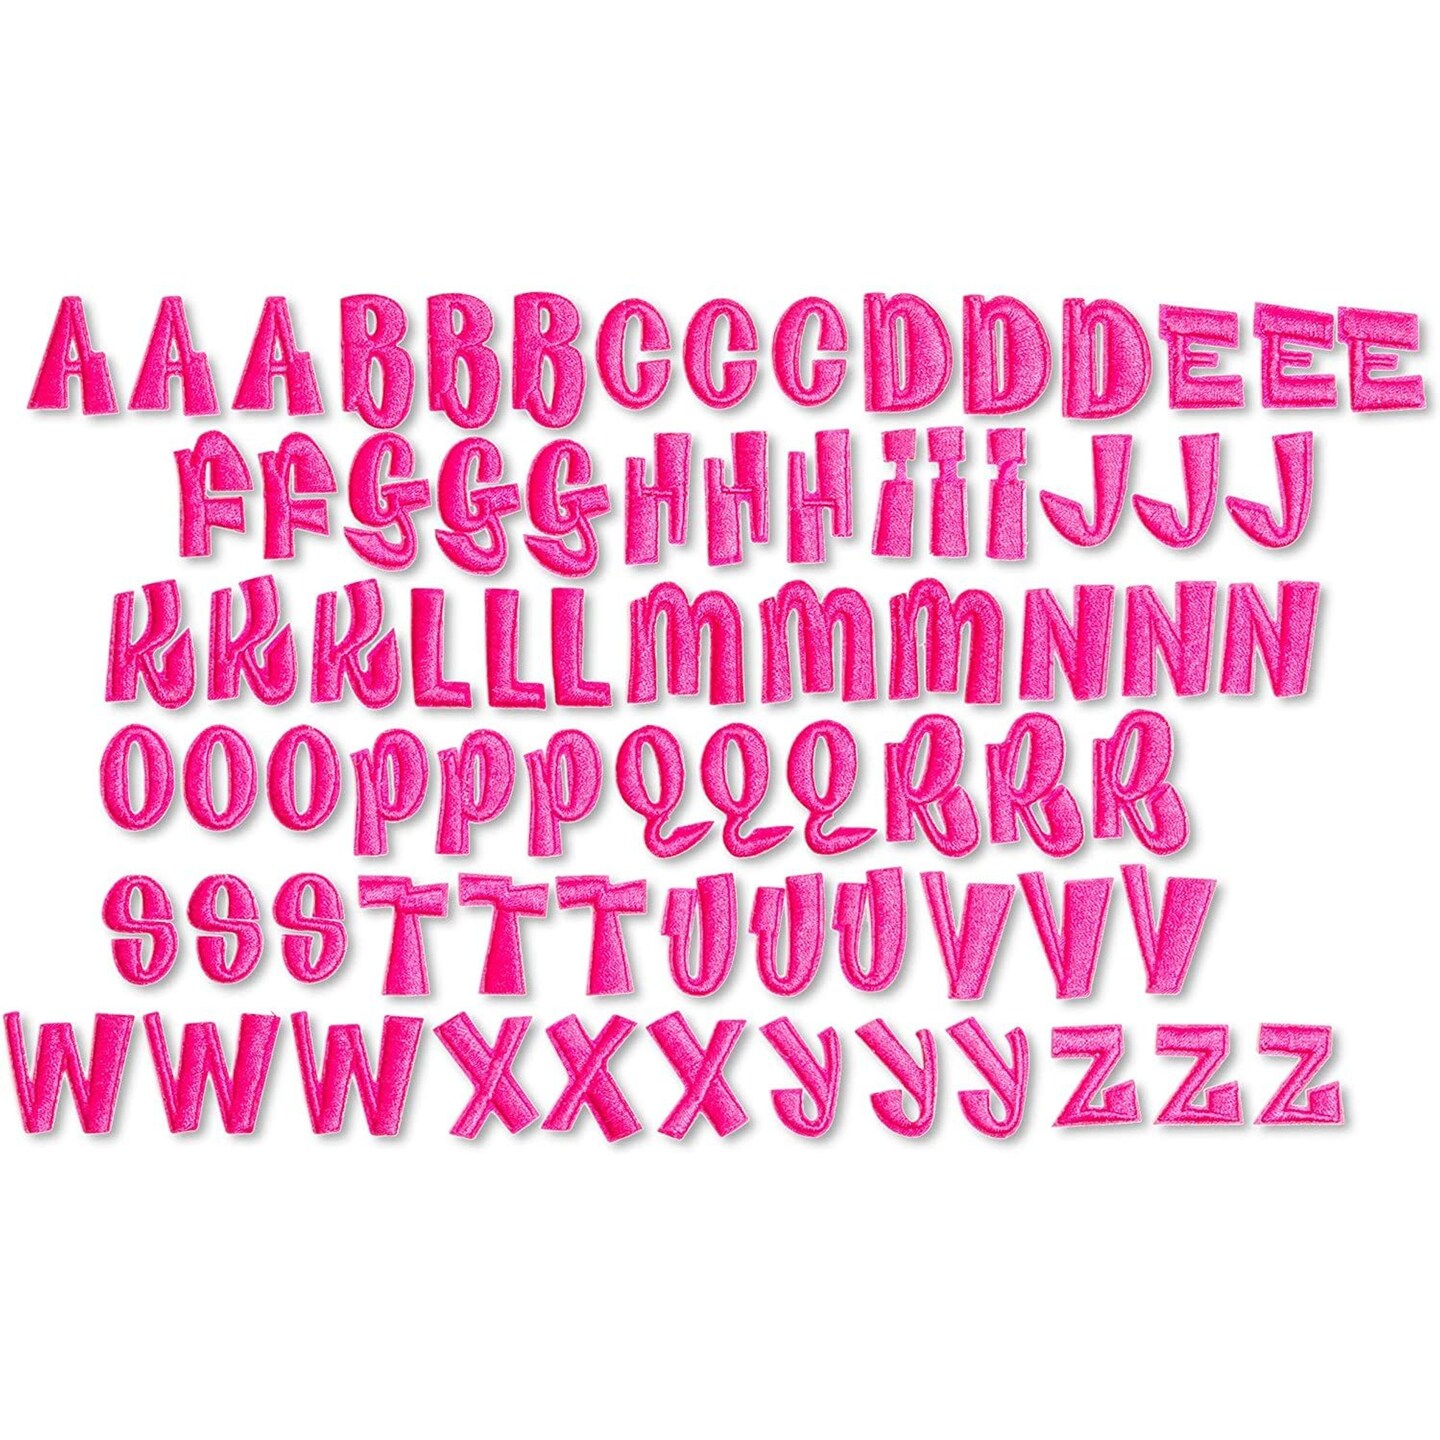  Pink Iron on Letters for Clothing,104 Pieces Iron on Patches  for Clothing,4 Set Letter Patches for Clothing,1.6” x 2”